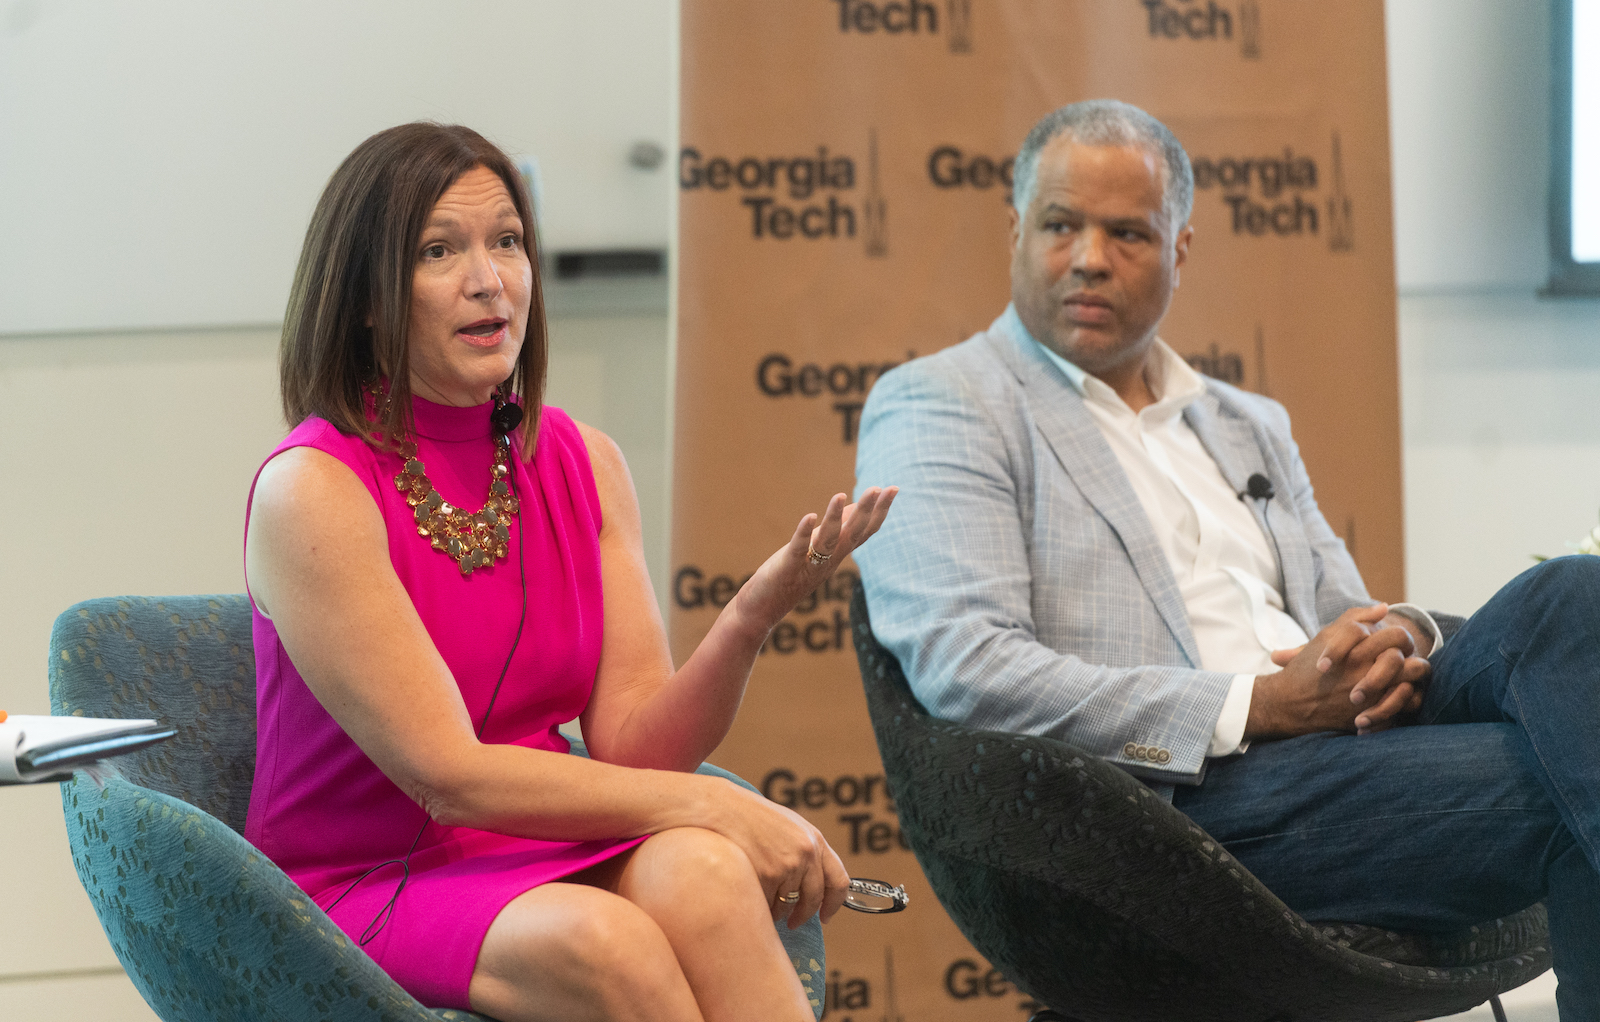 Lara Hodgson, co-founder, president, and CEO of Now, and Guy Primus, CEO and board member of Valence Enterprises, were panelists at the Inclusive Entrepreneurship Forum. Photo by Allison Carter.